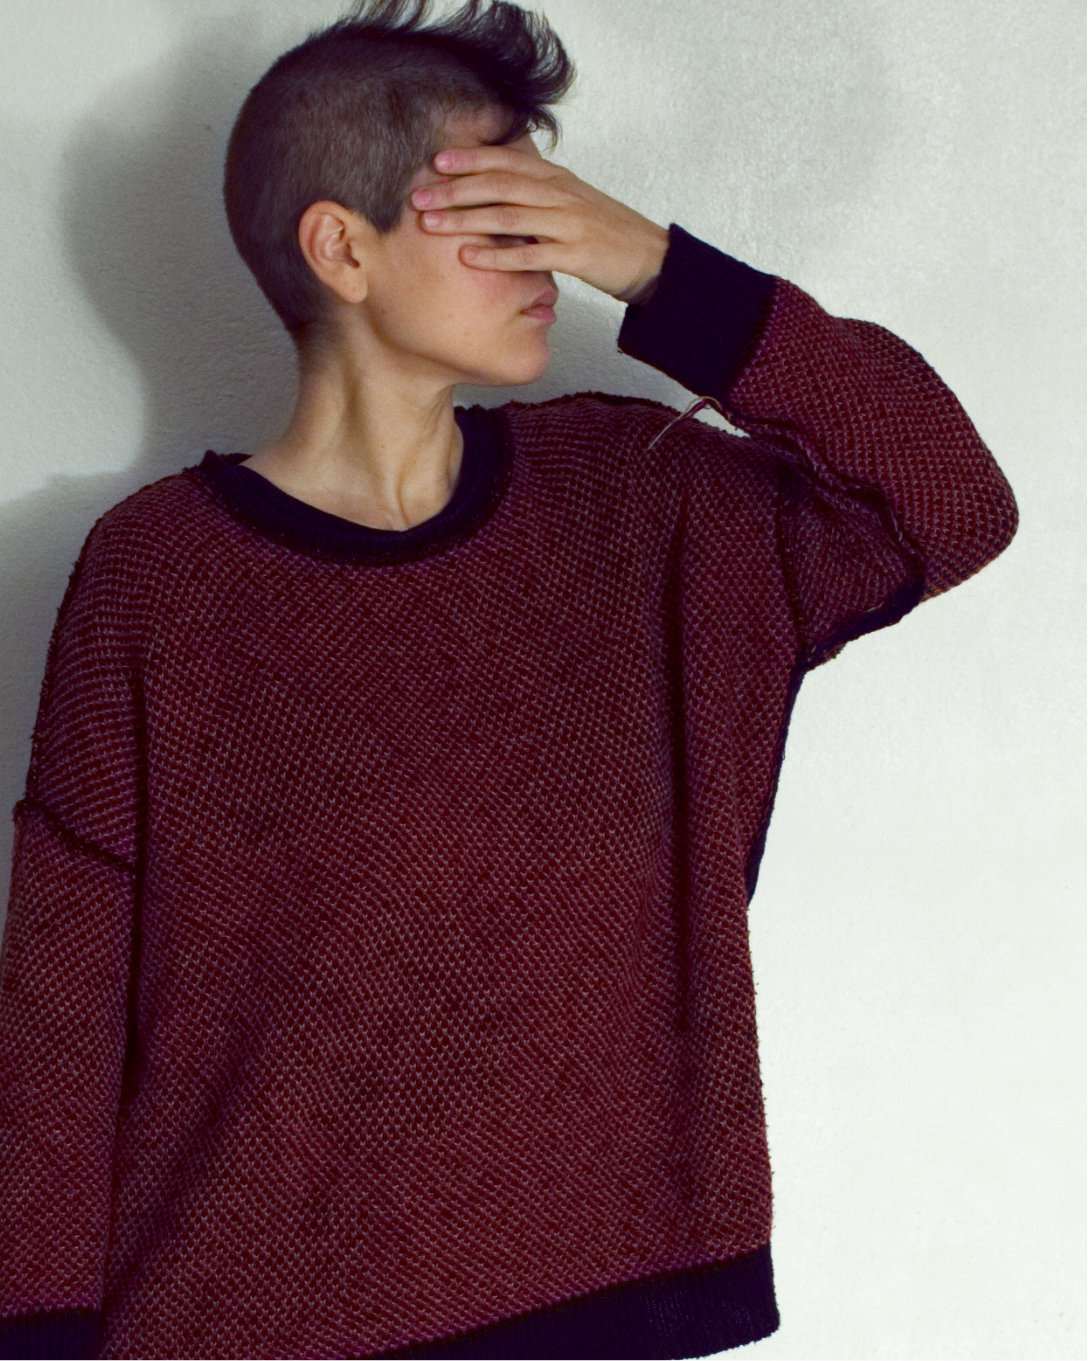 Model wears a red and black sweater, coring their eyes